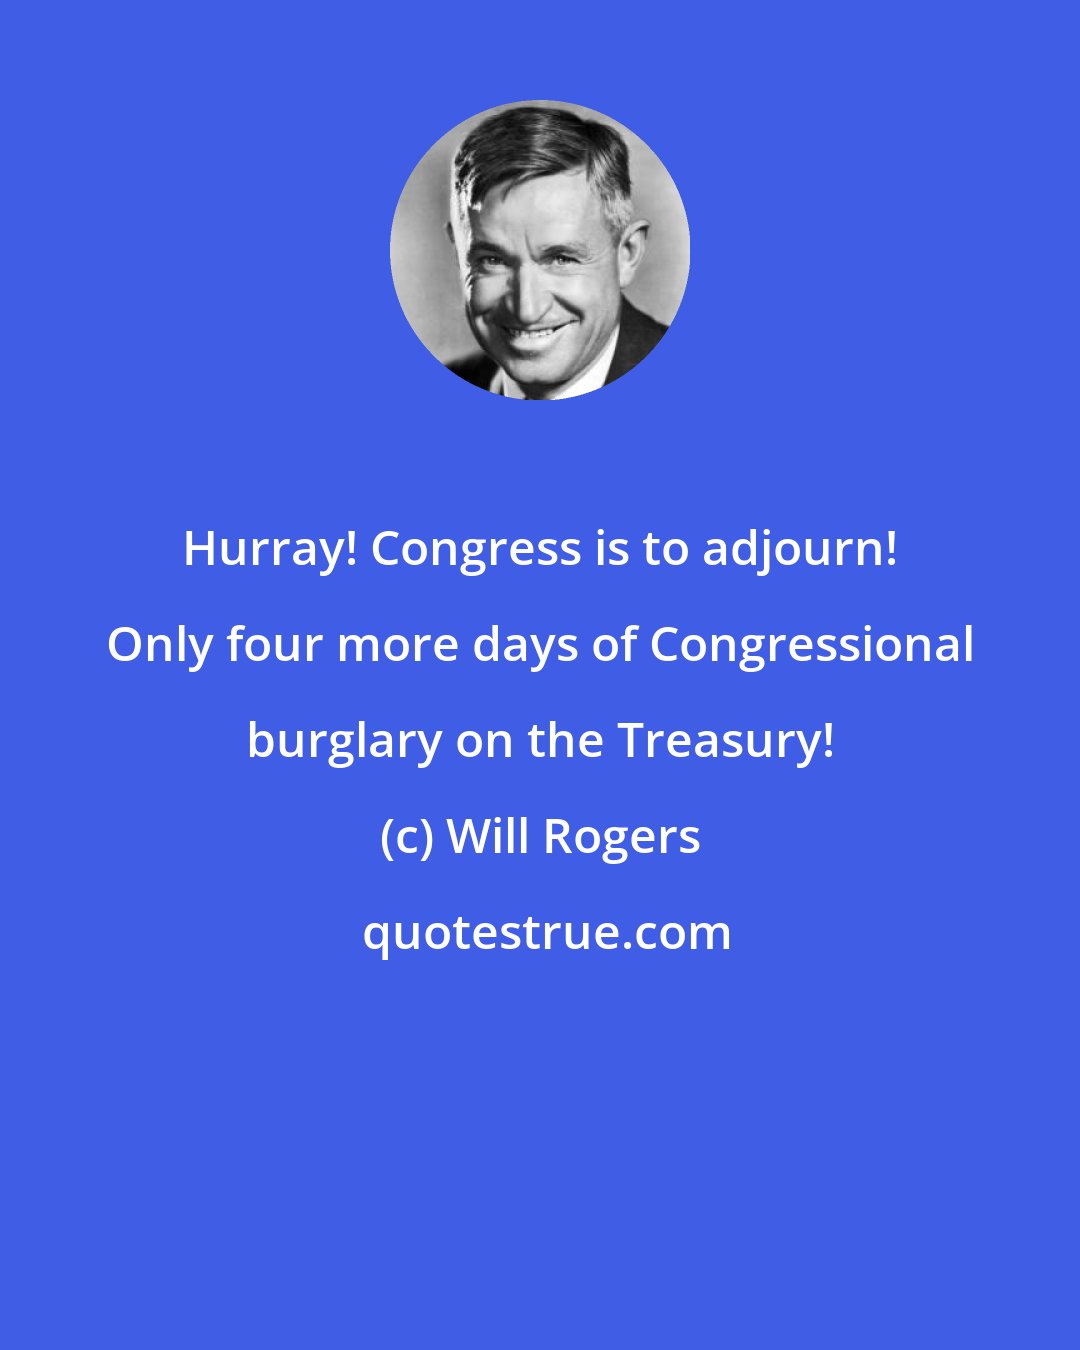 Will Rogers: Hurray! Congress is to adjourn! Only four more days of Congressional burglary on the Treasury!